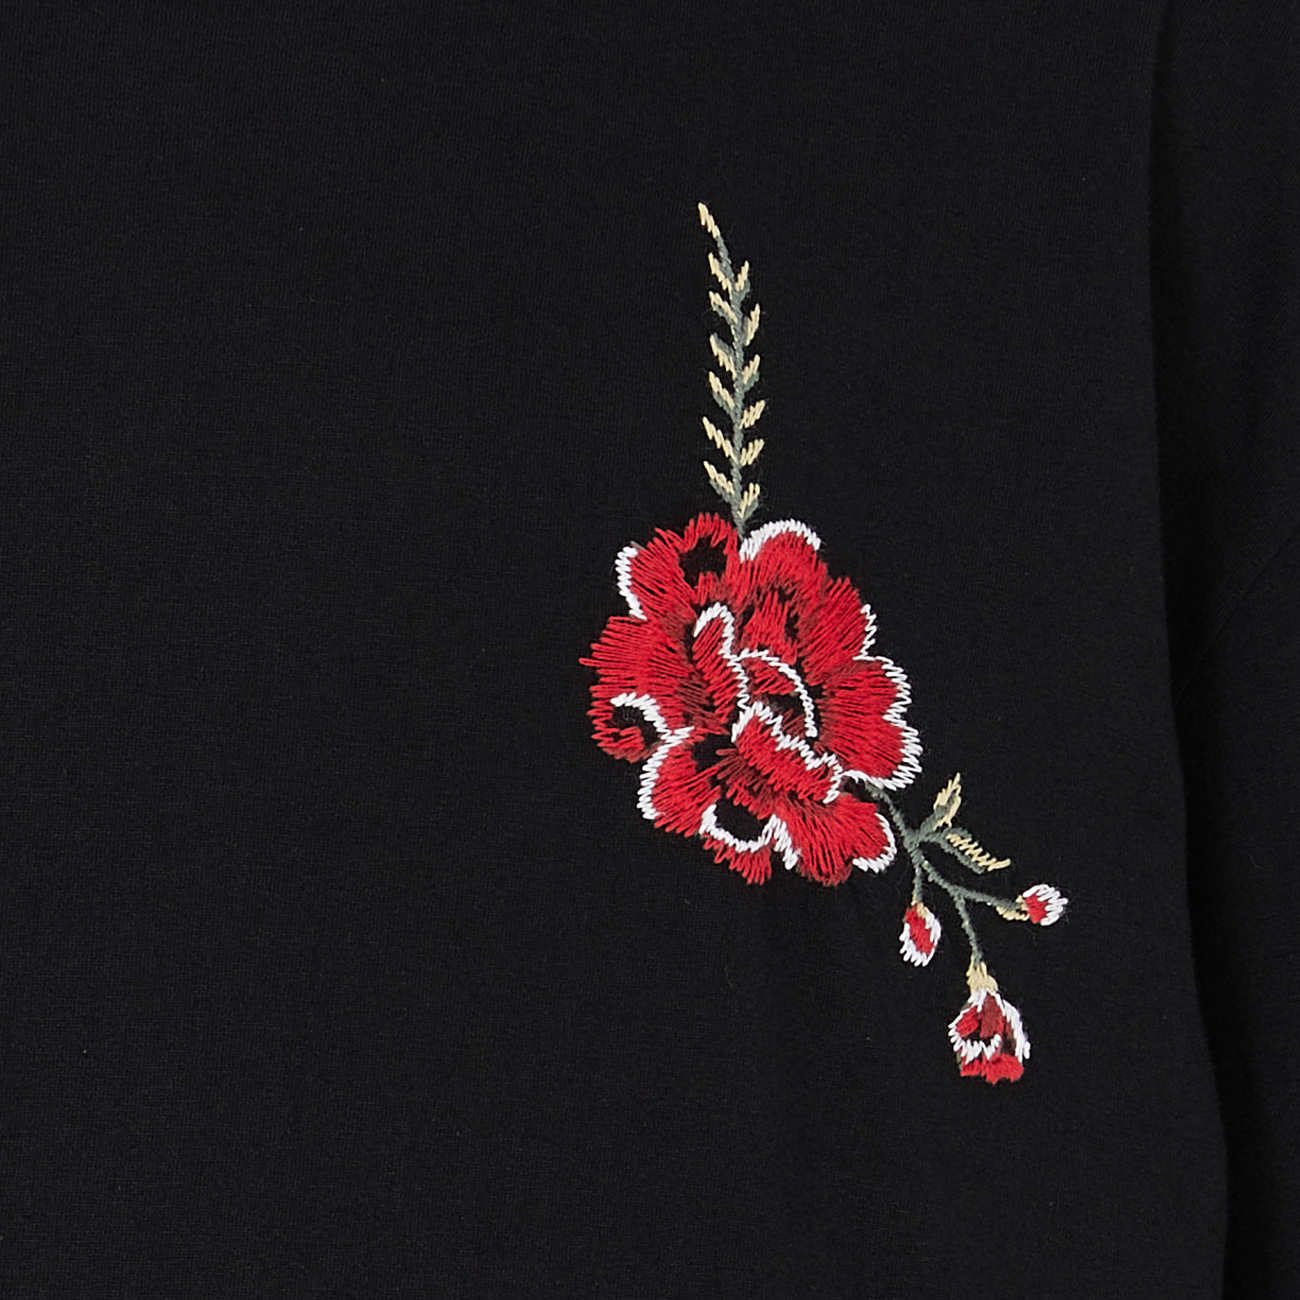 FLOWER EMBROIDERY T SHIRT BLACK